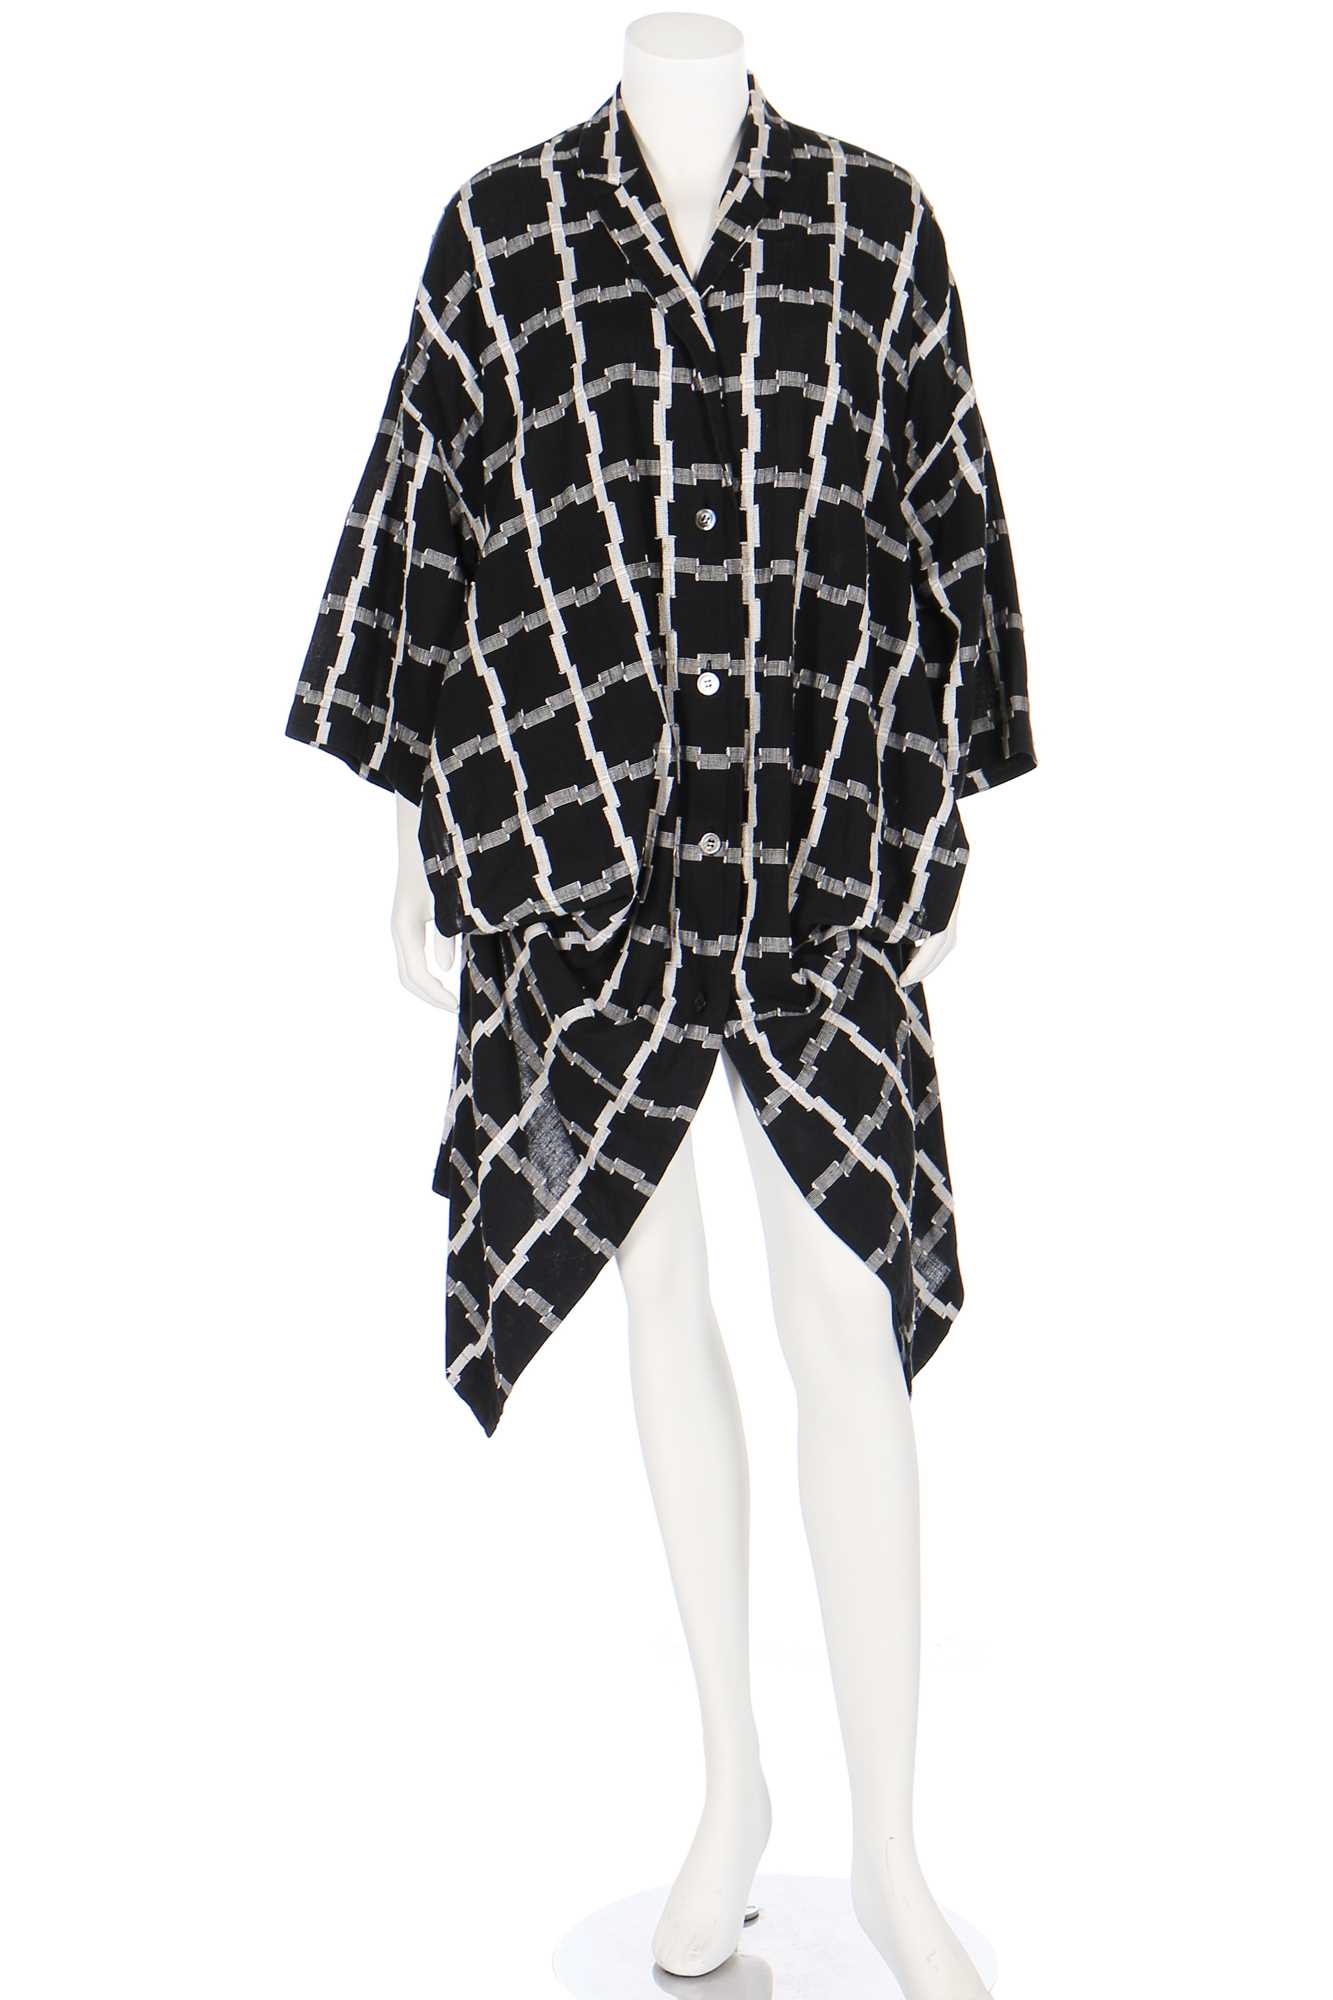 Lot 257 - An Issey Miyake textured and patterned